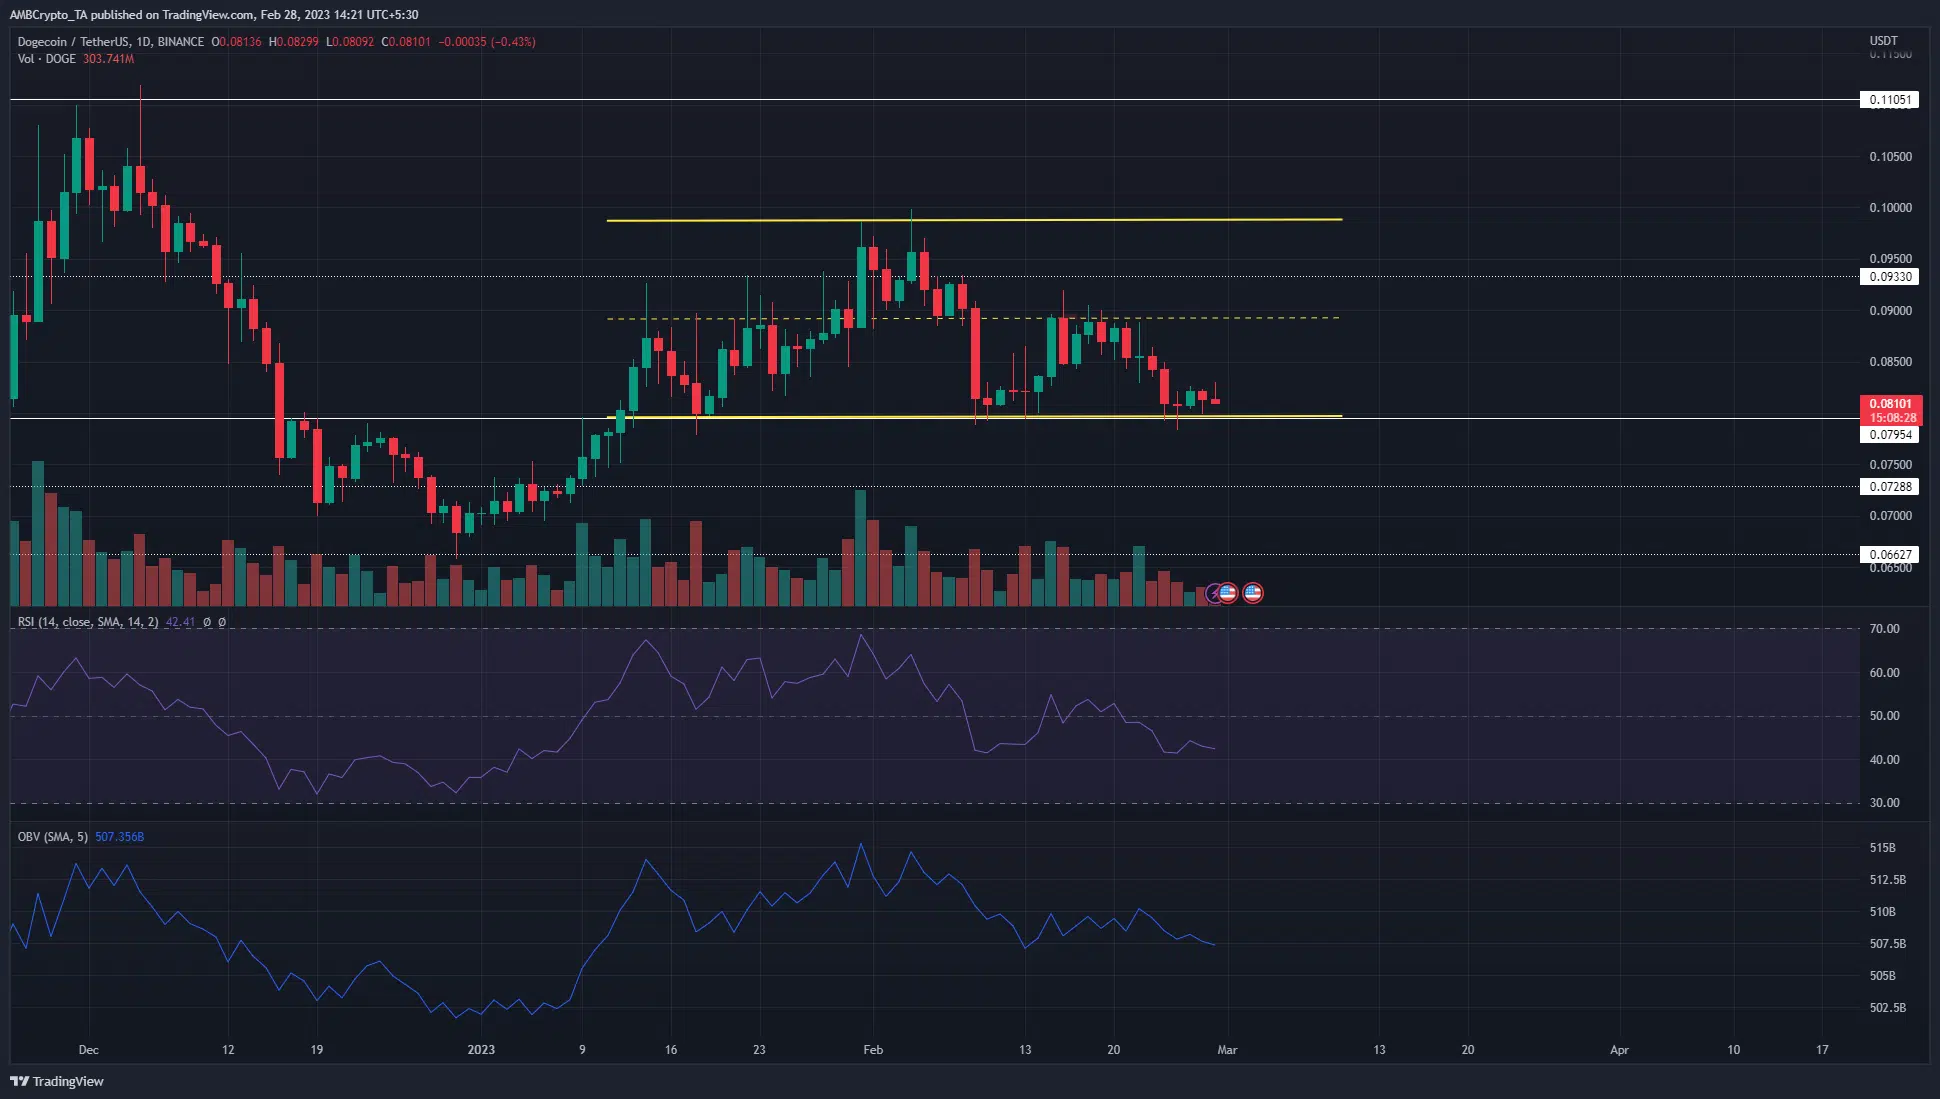 Dogecoin sinks to a support zone as momentum shifts in bearish favor